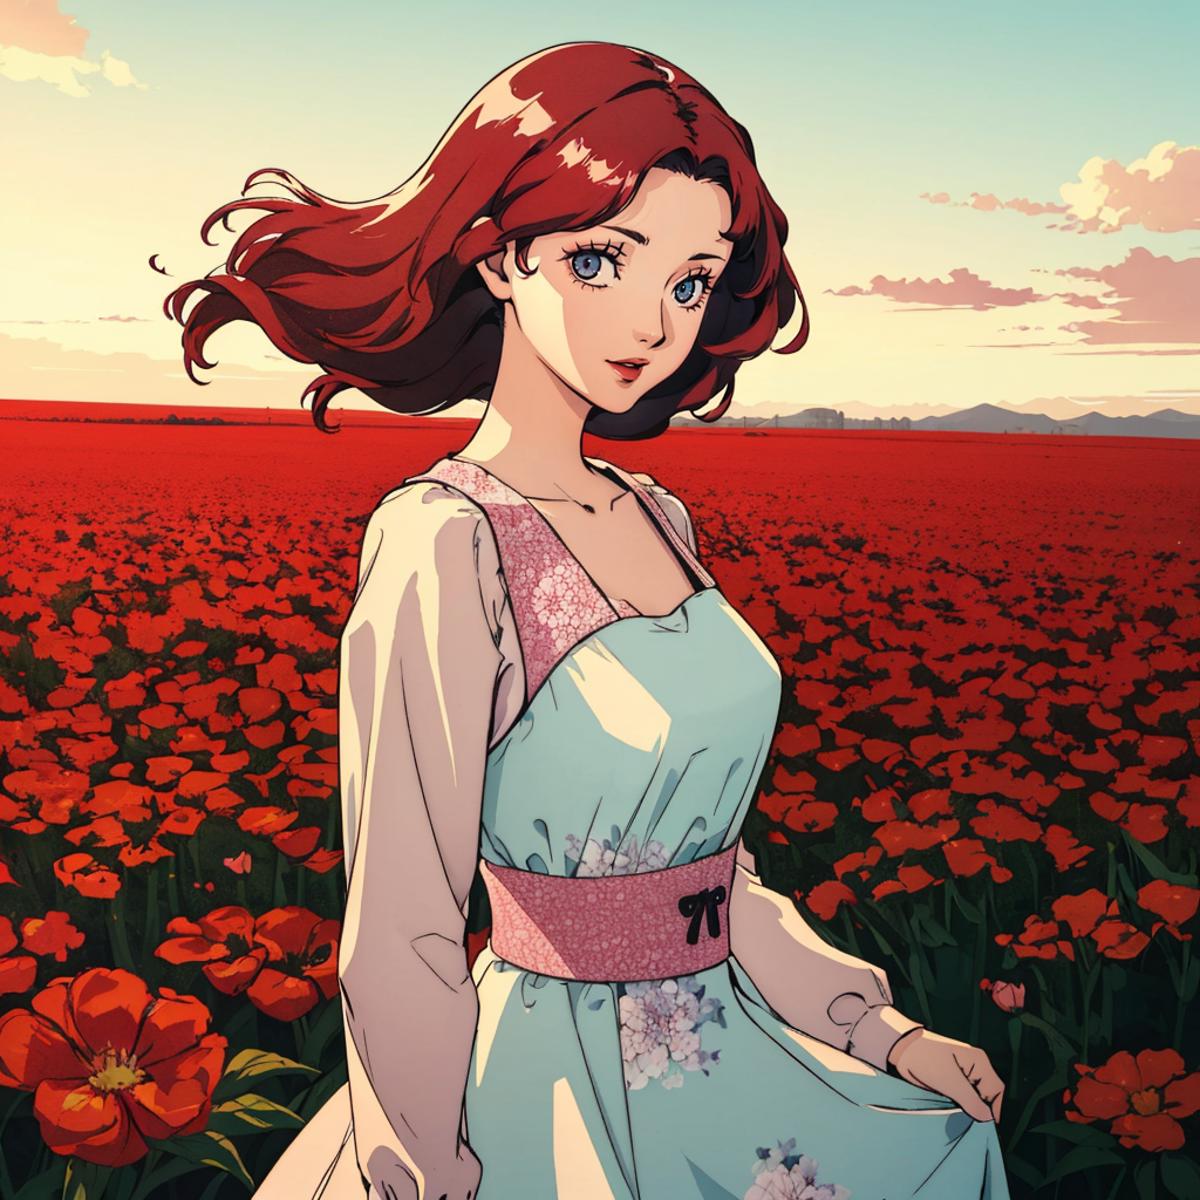 A beautiful animated woman with long brown hair standing in a field of red flowers.